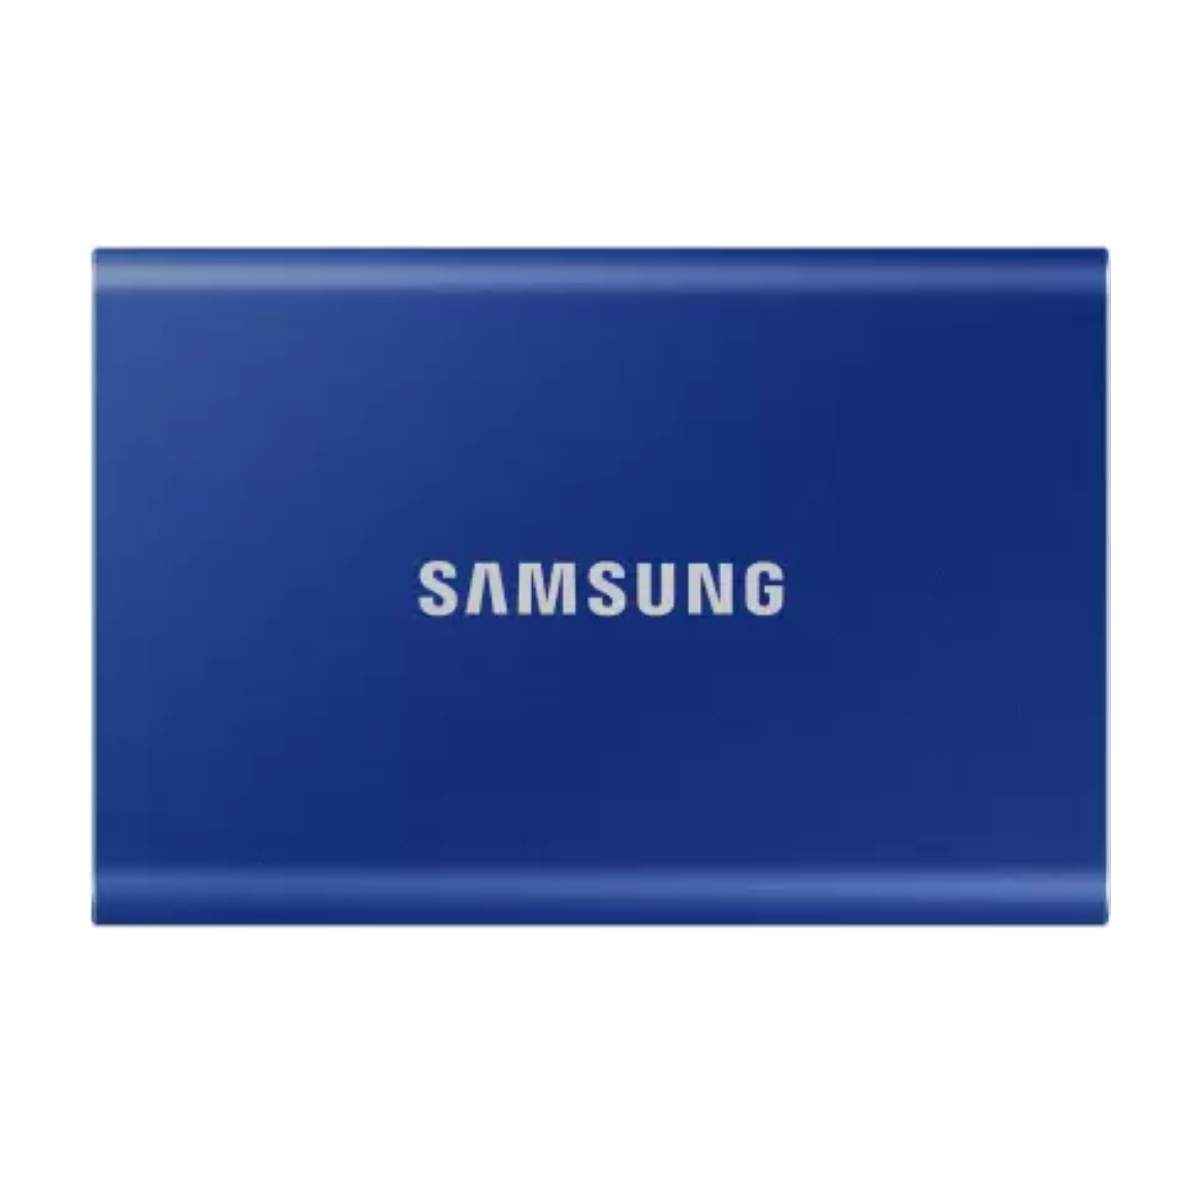 SAMSUNG T7 1 TB External Solid State Drive